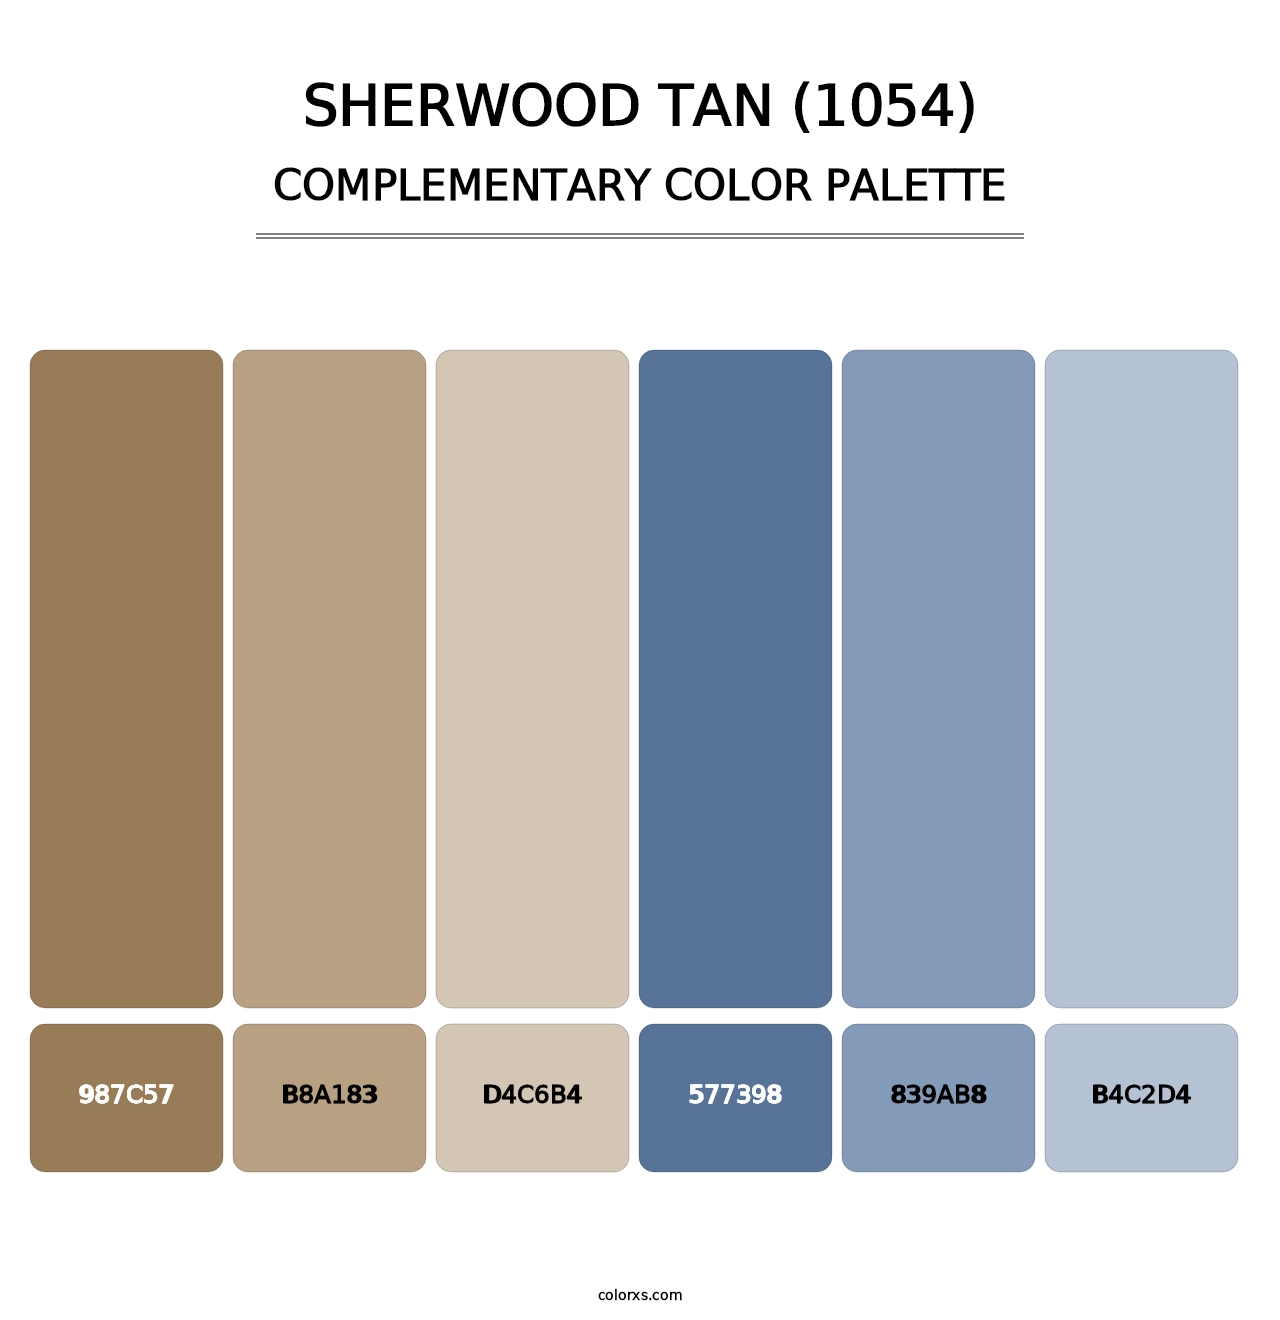 Sherwood Tan (1054) - Complementary Color Palette